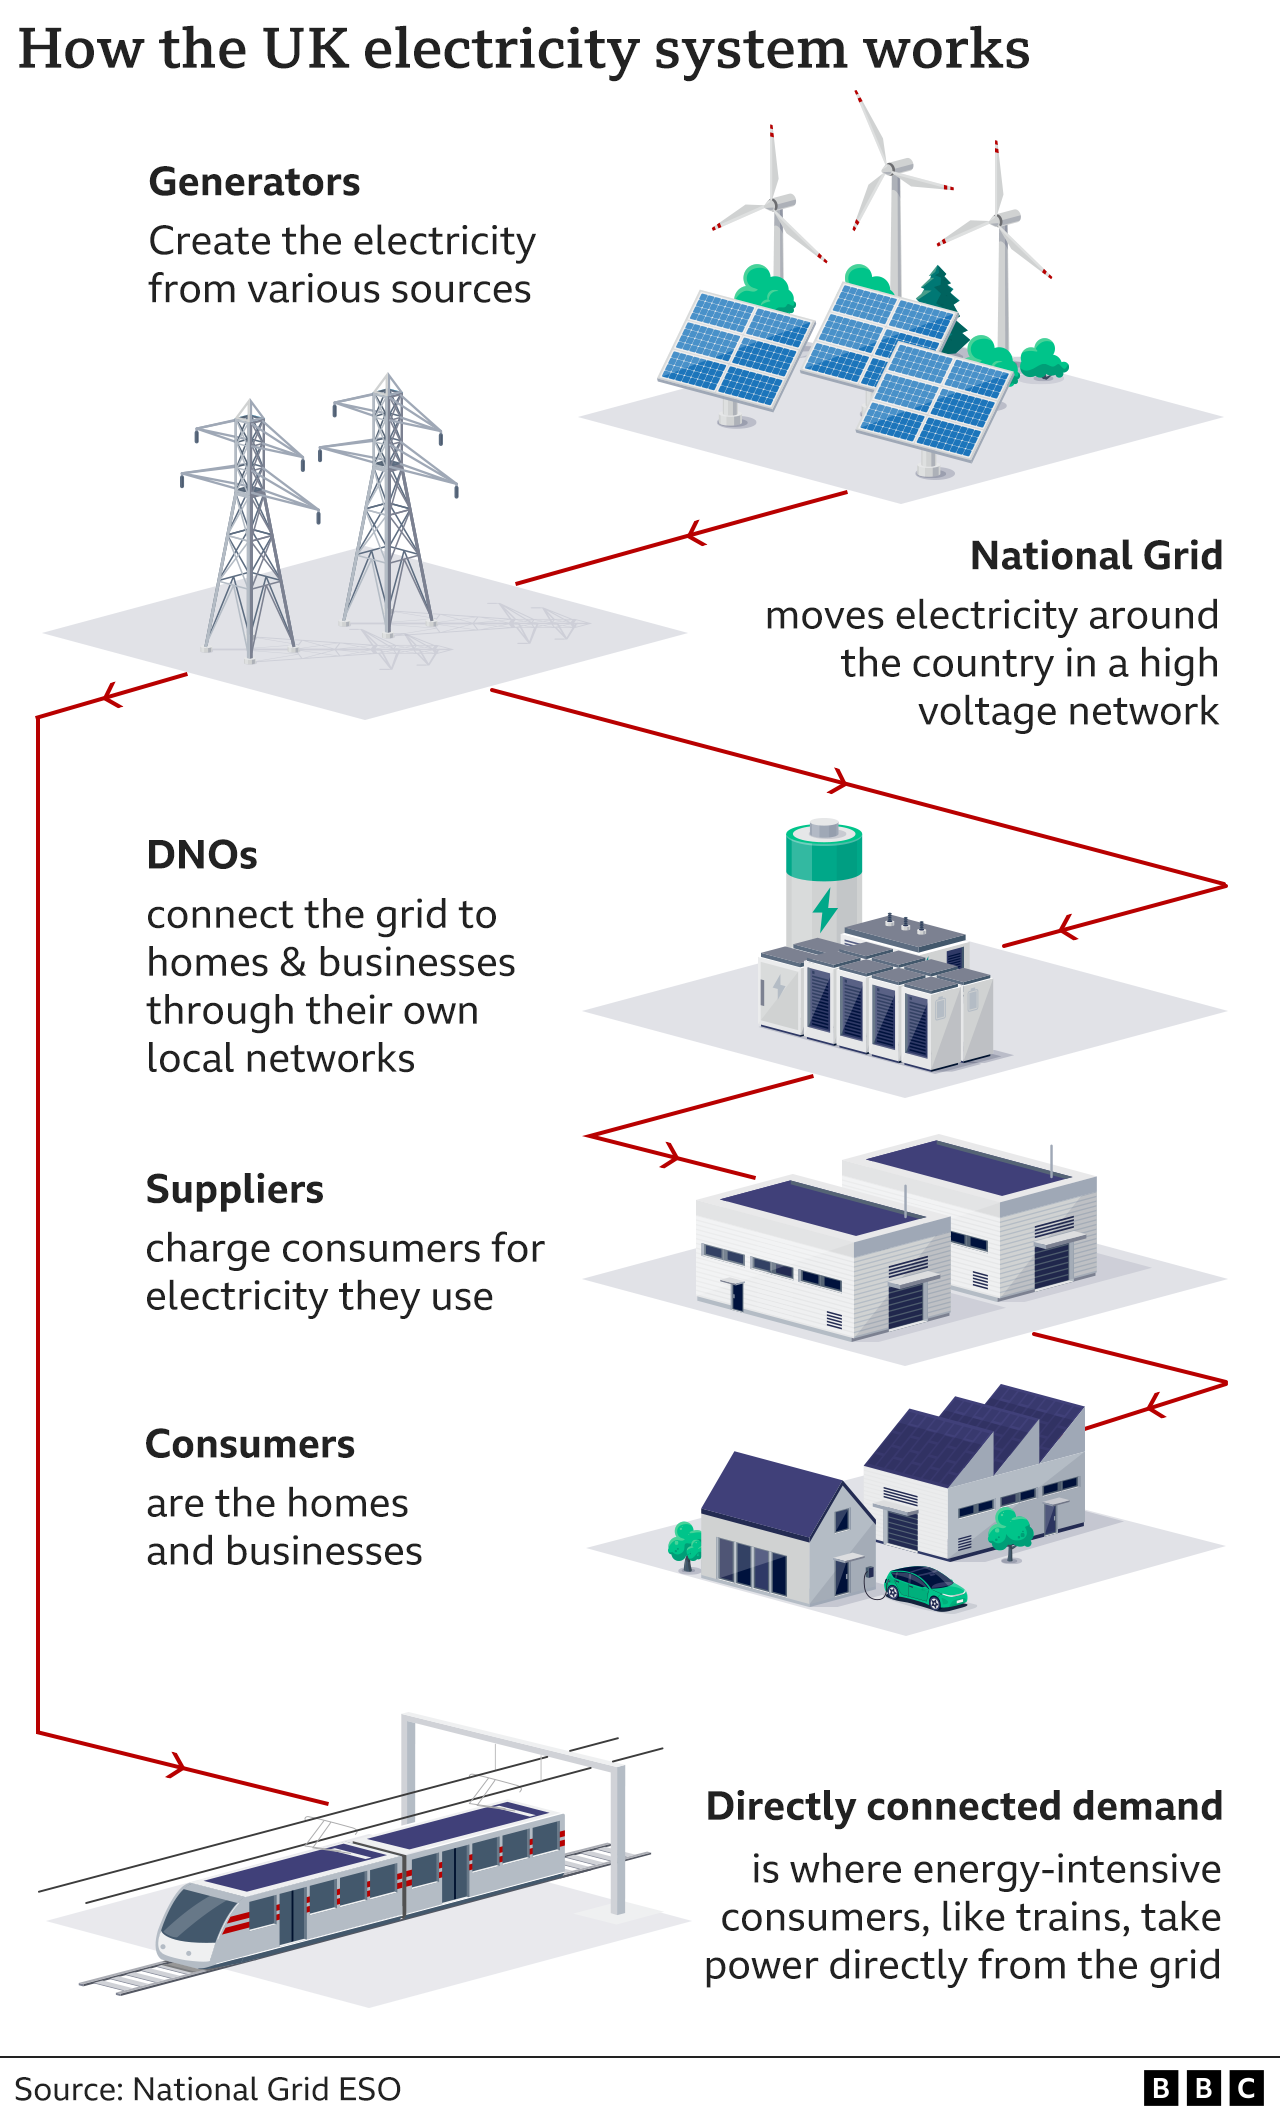 Diagram showing how the UK electricity system works and the different stakeholders